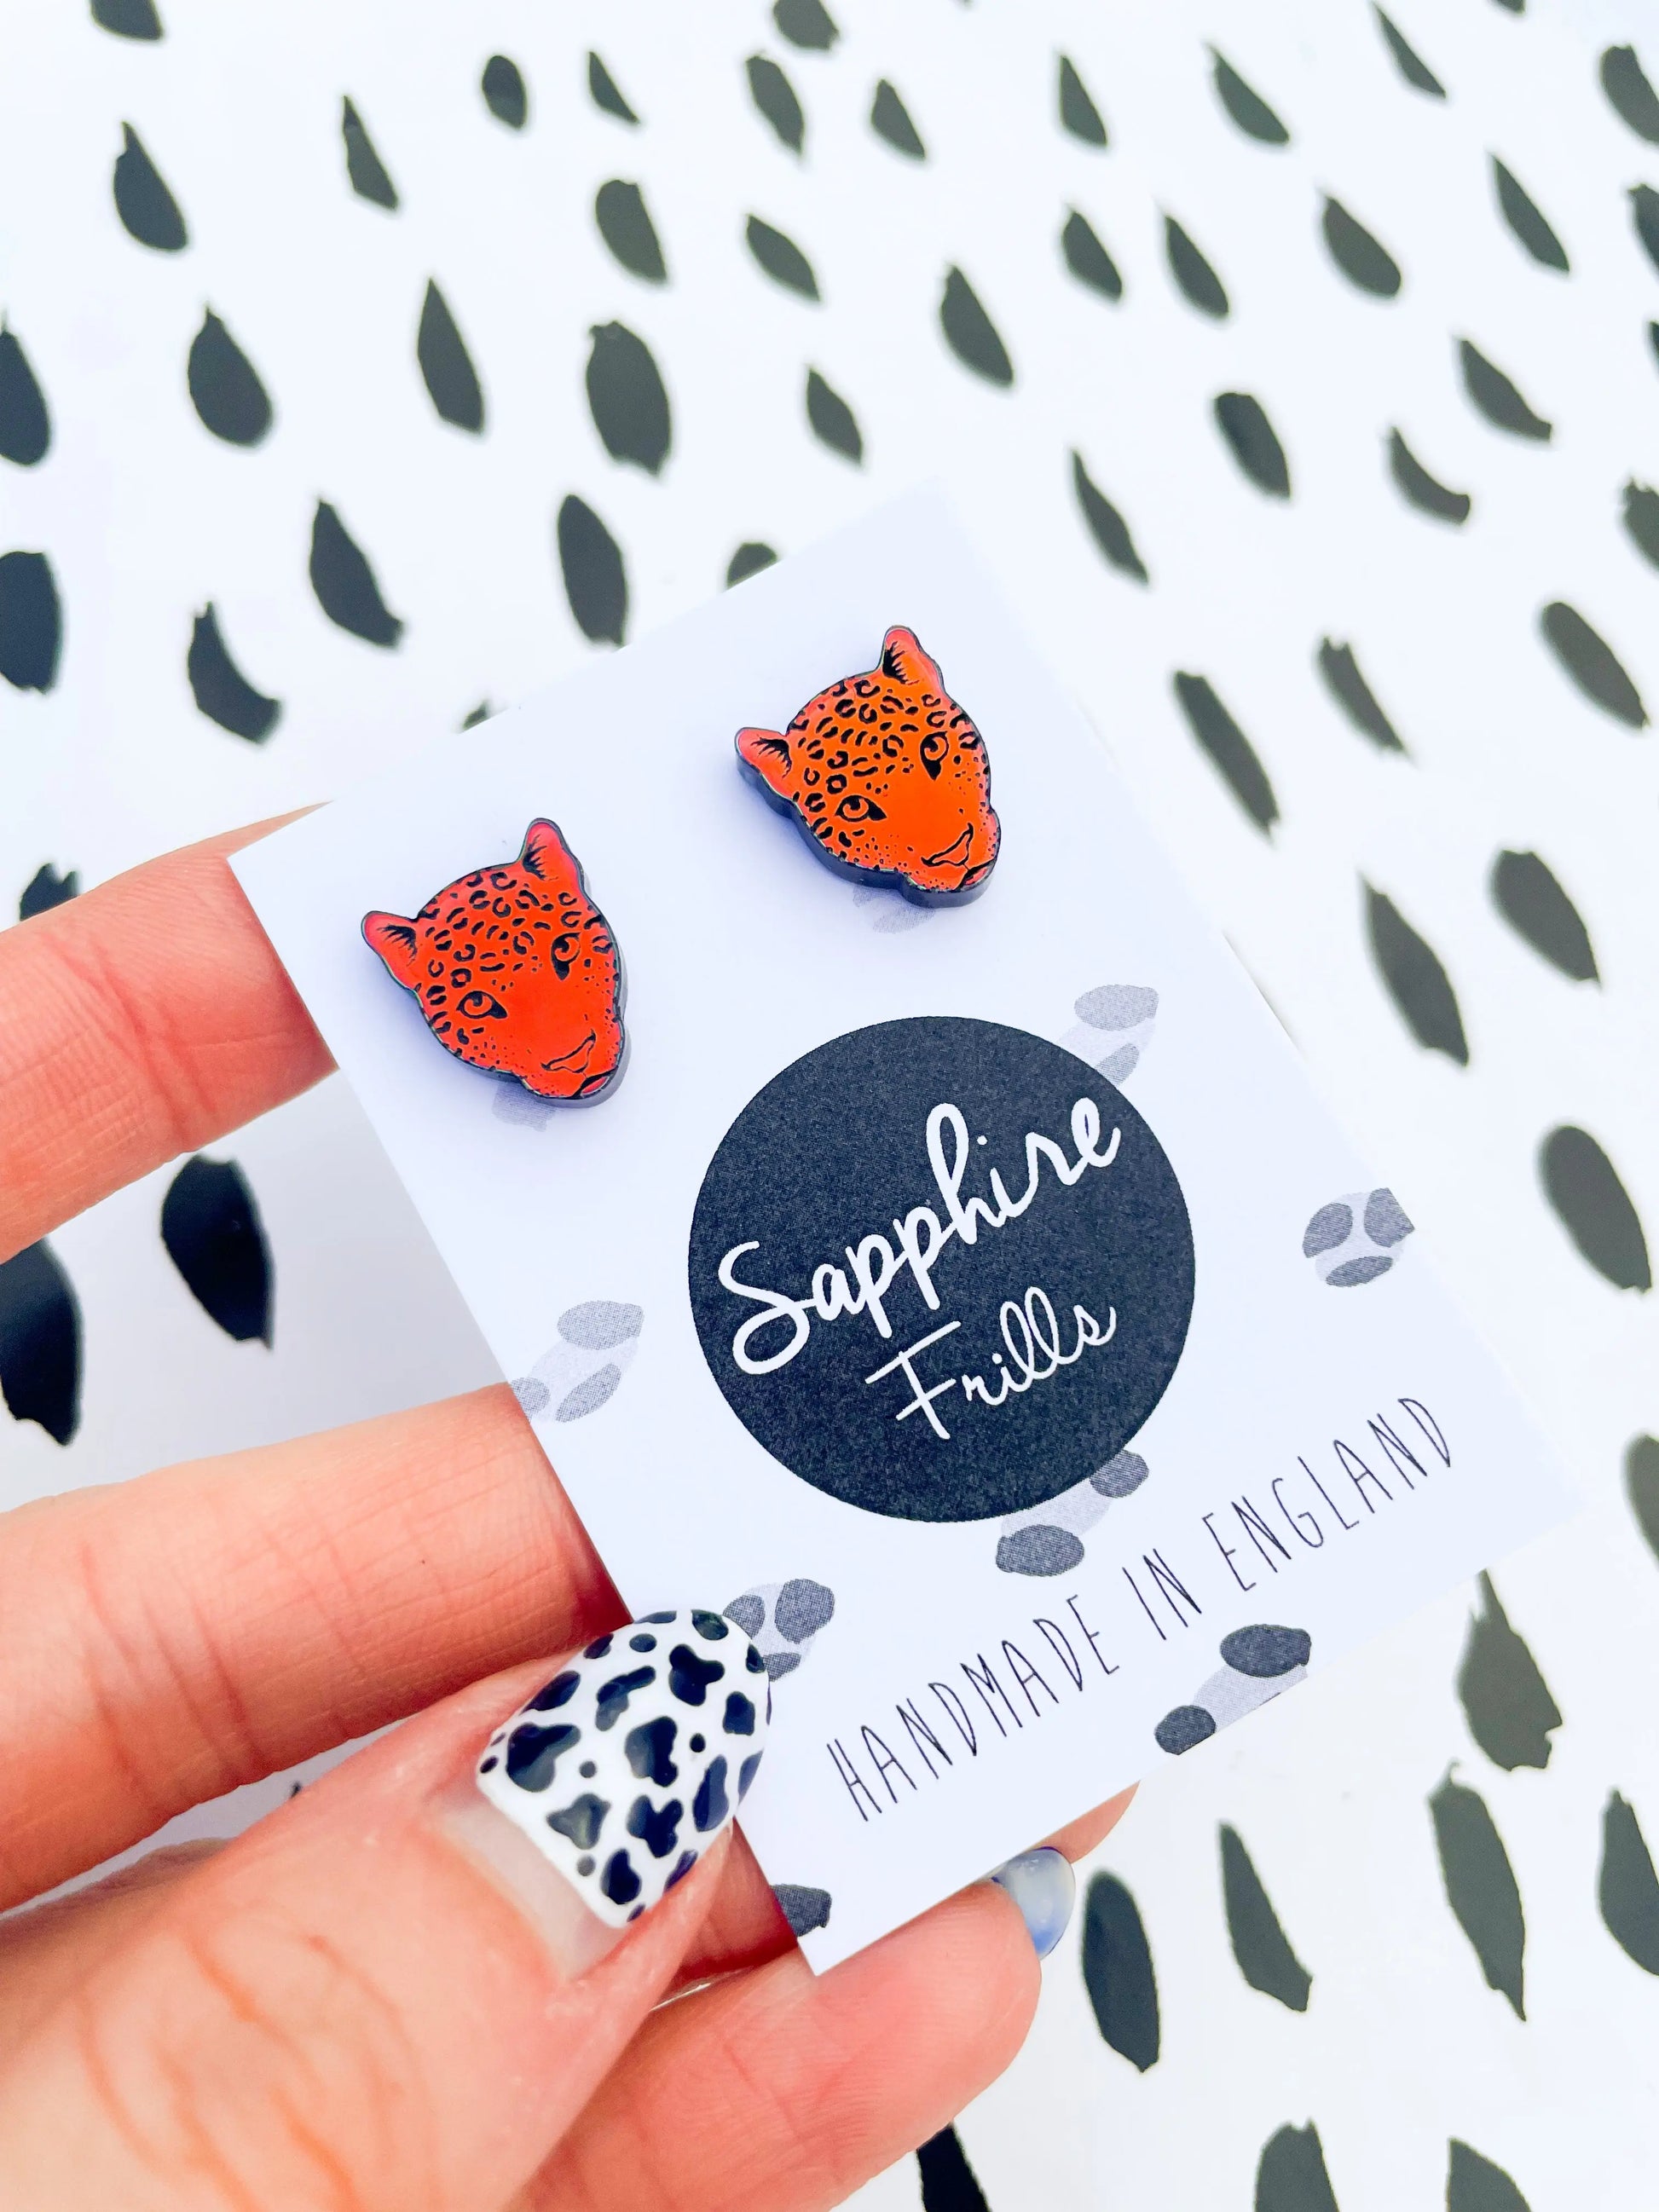 Small Iridescent Orange and Green Acrylic Leopard Face Stud Earrings from Sapphire Frills